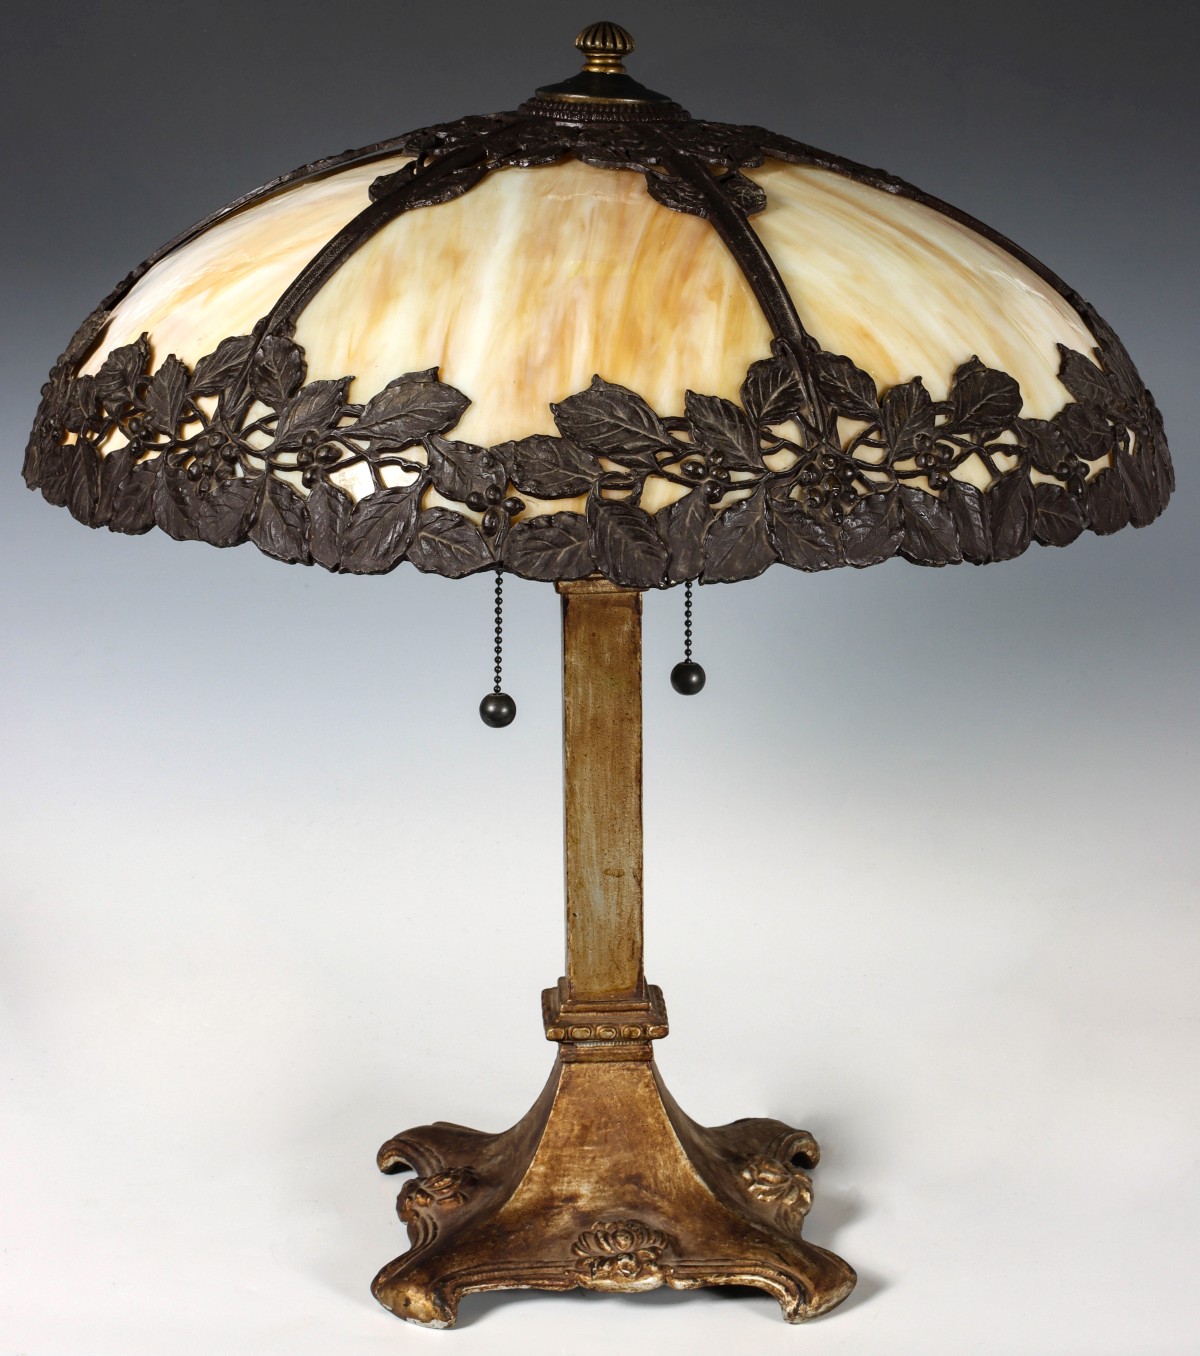 AN ORNATE FLORAL PATTERN LAMP WITH BENT GLASS PANELS